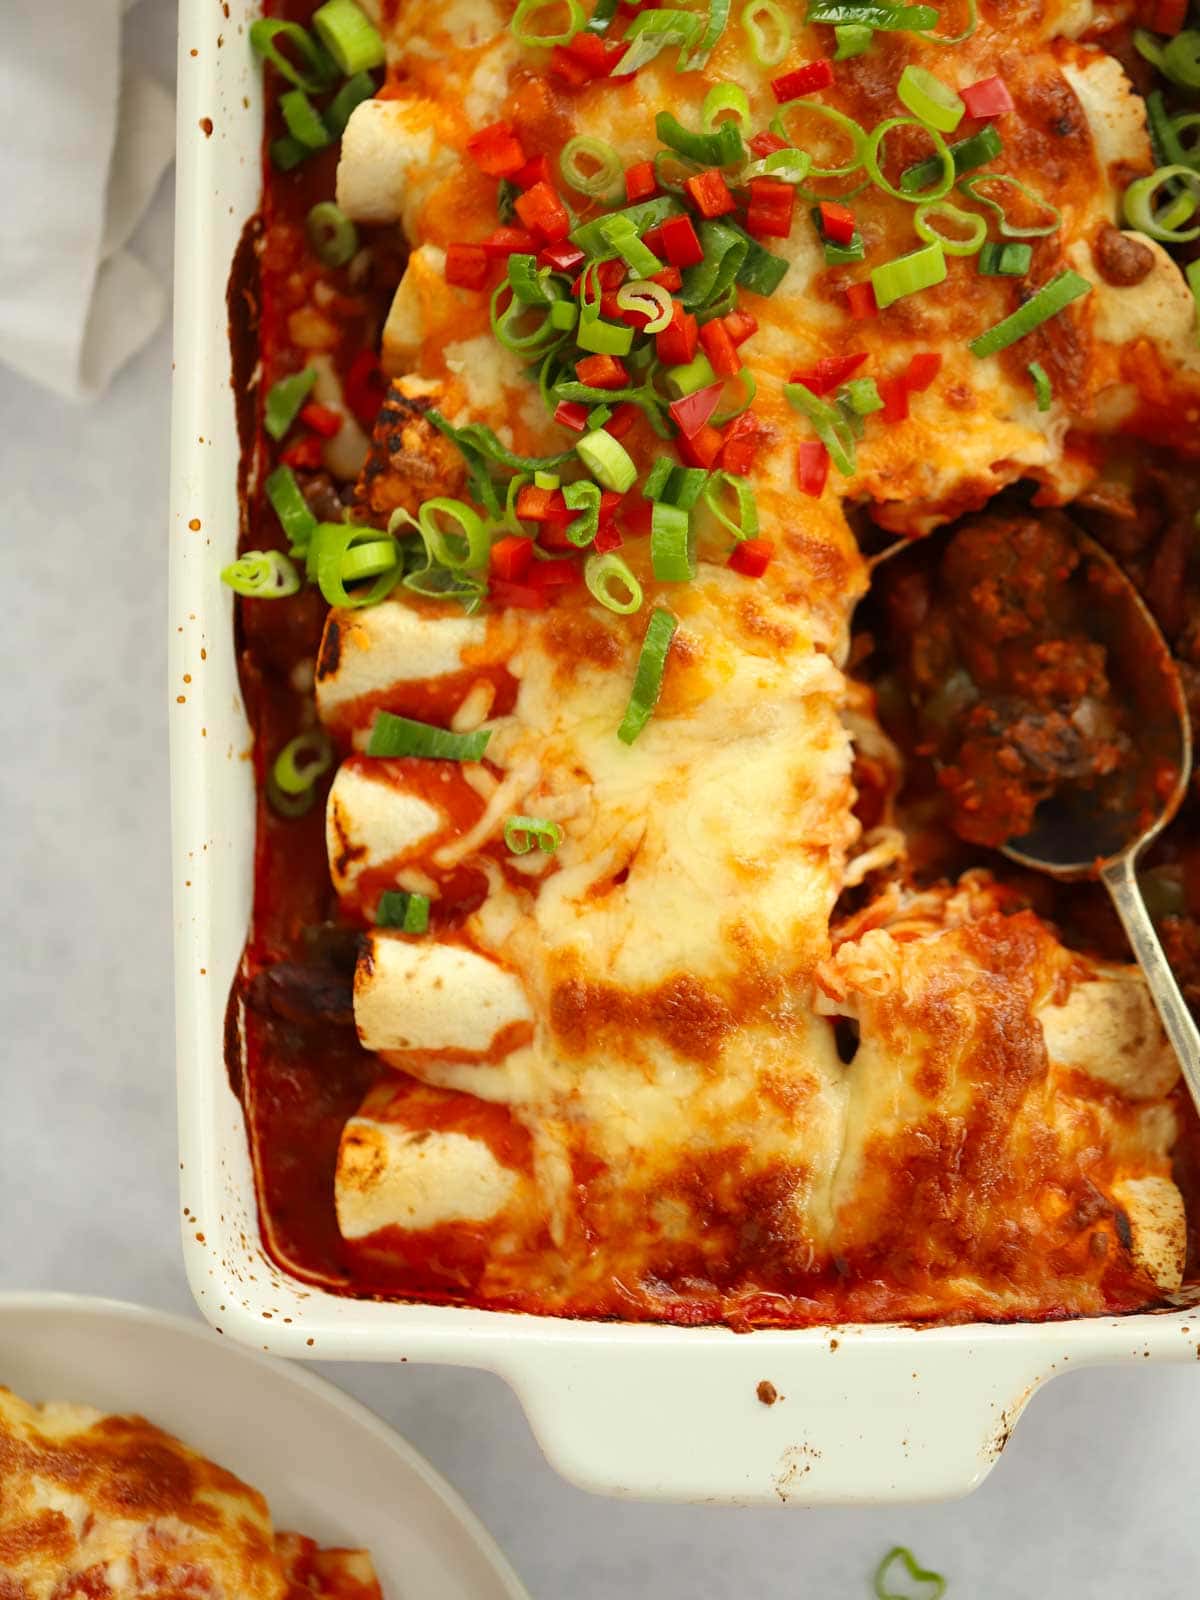 A Chilli Beef Enchilada Recipe for the whole family to enjoy